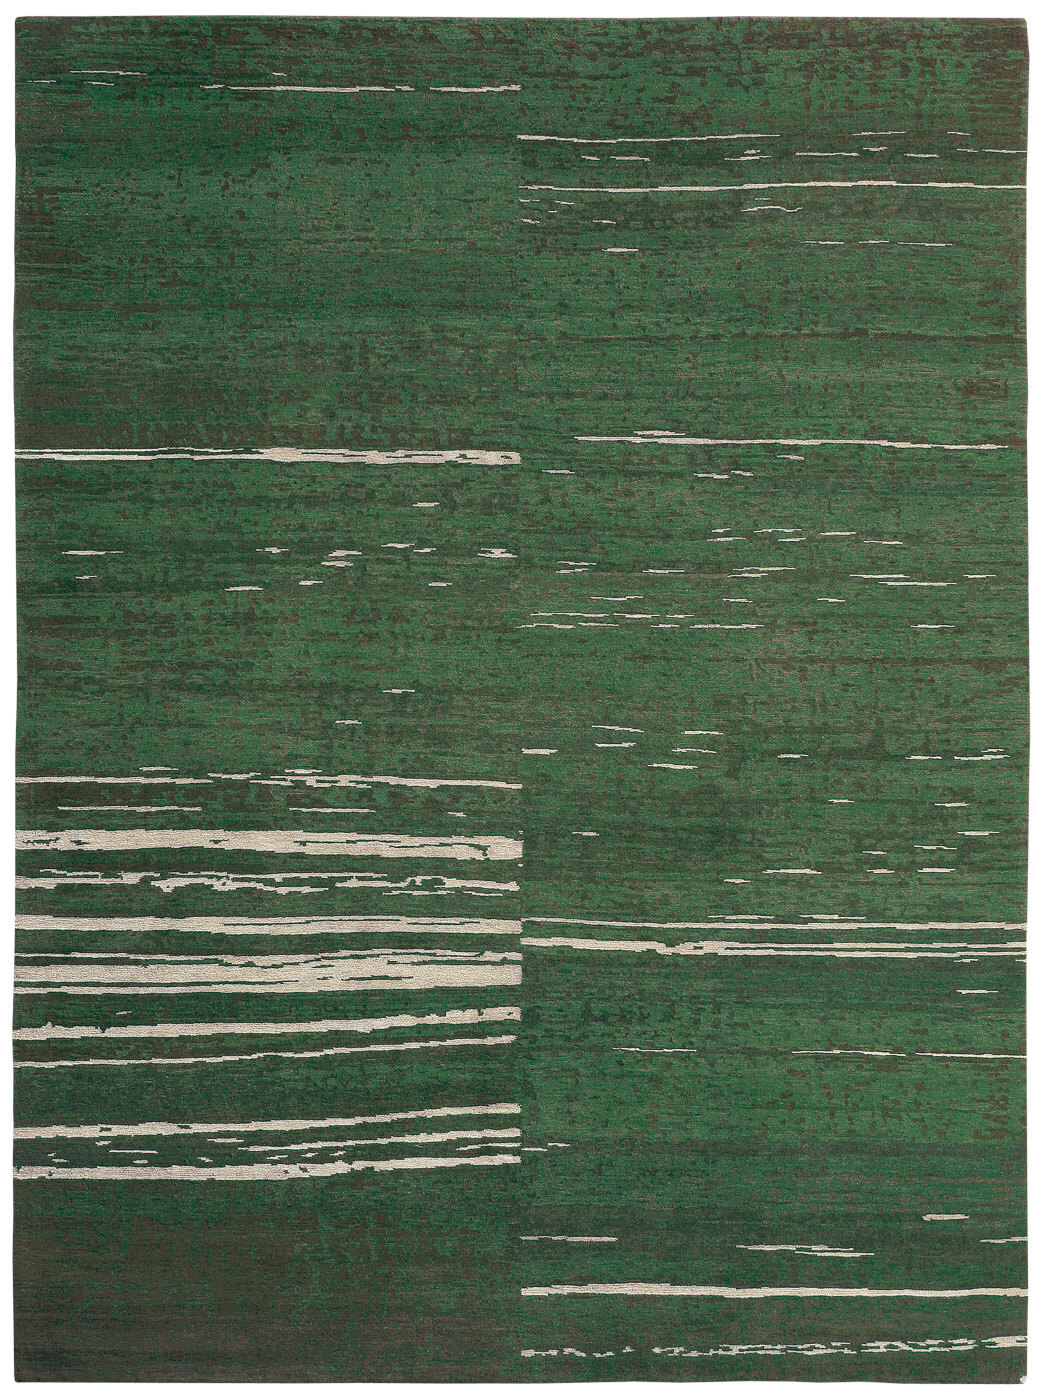 Hand-Knotted Wool Green Rug